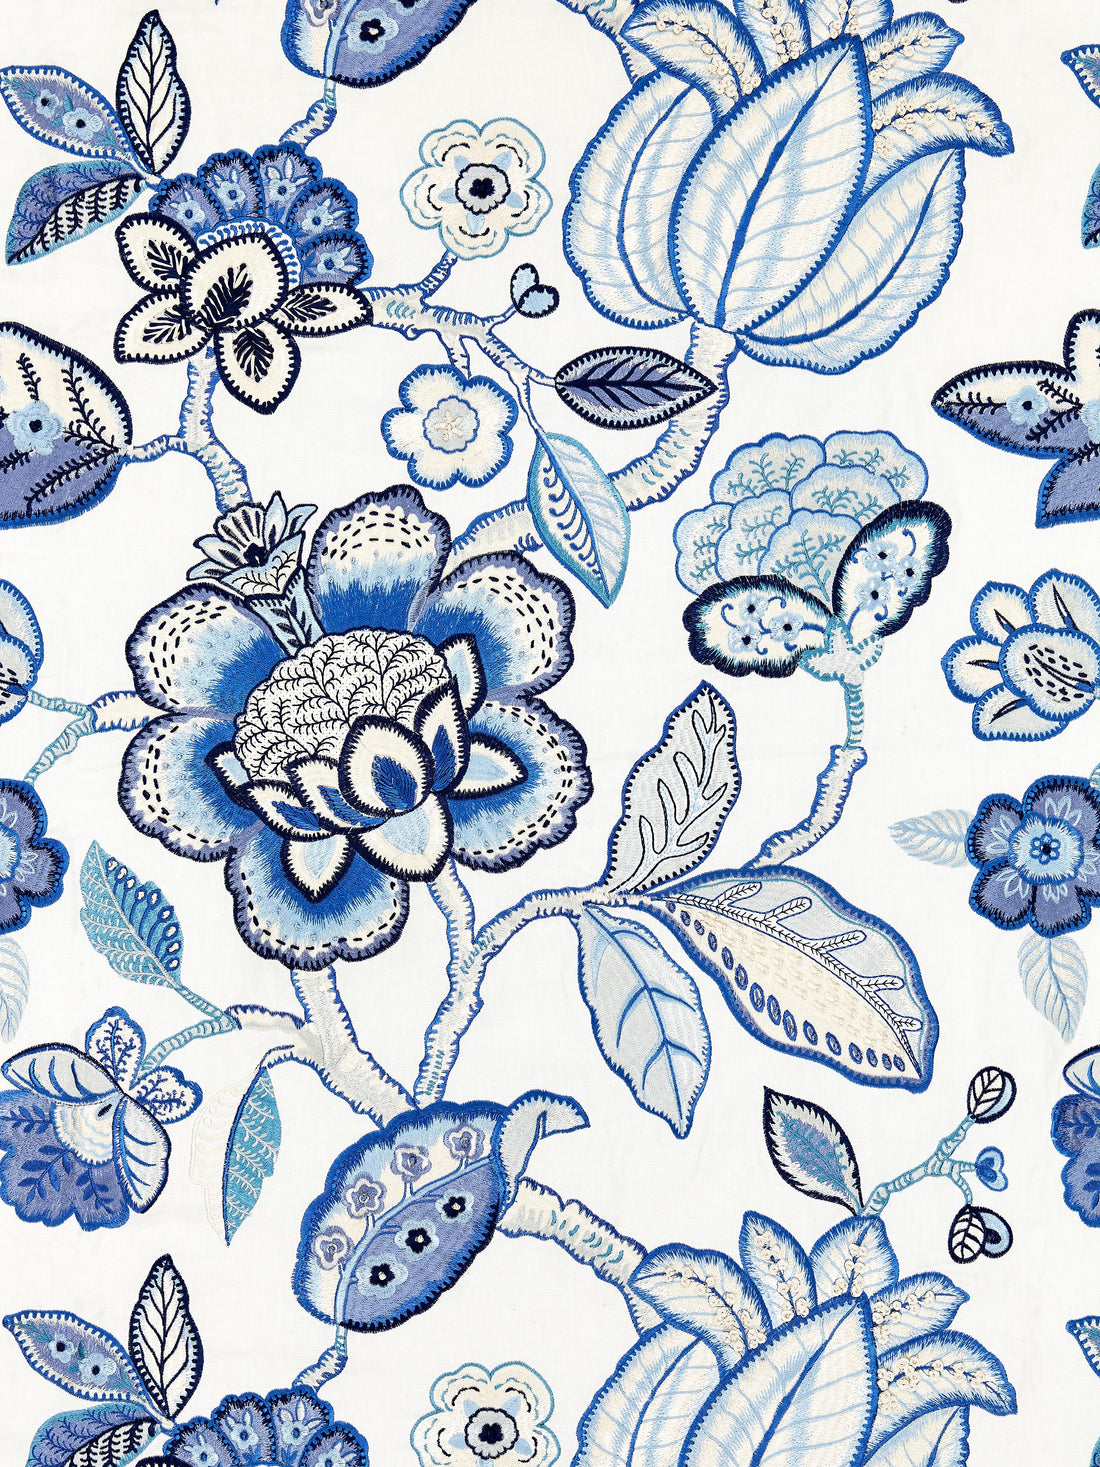 Coromandel Embroidery fabric in porcelain color - pattern number SC 000227126 - by Scalamandre in the Scalamandre Fabrics Book 1 collection